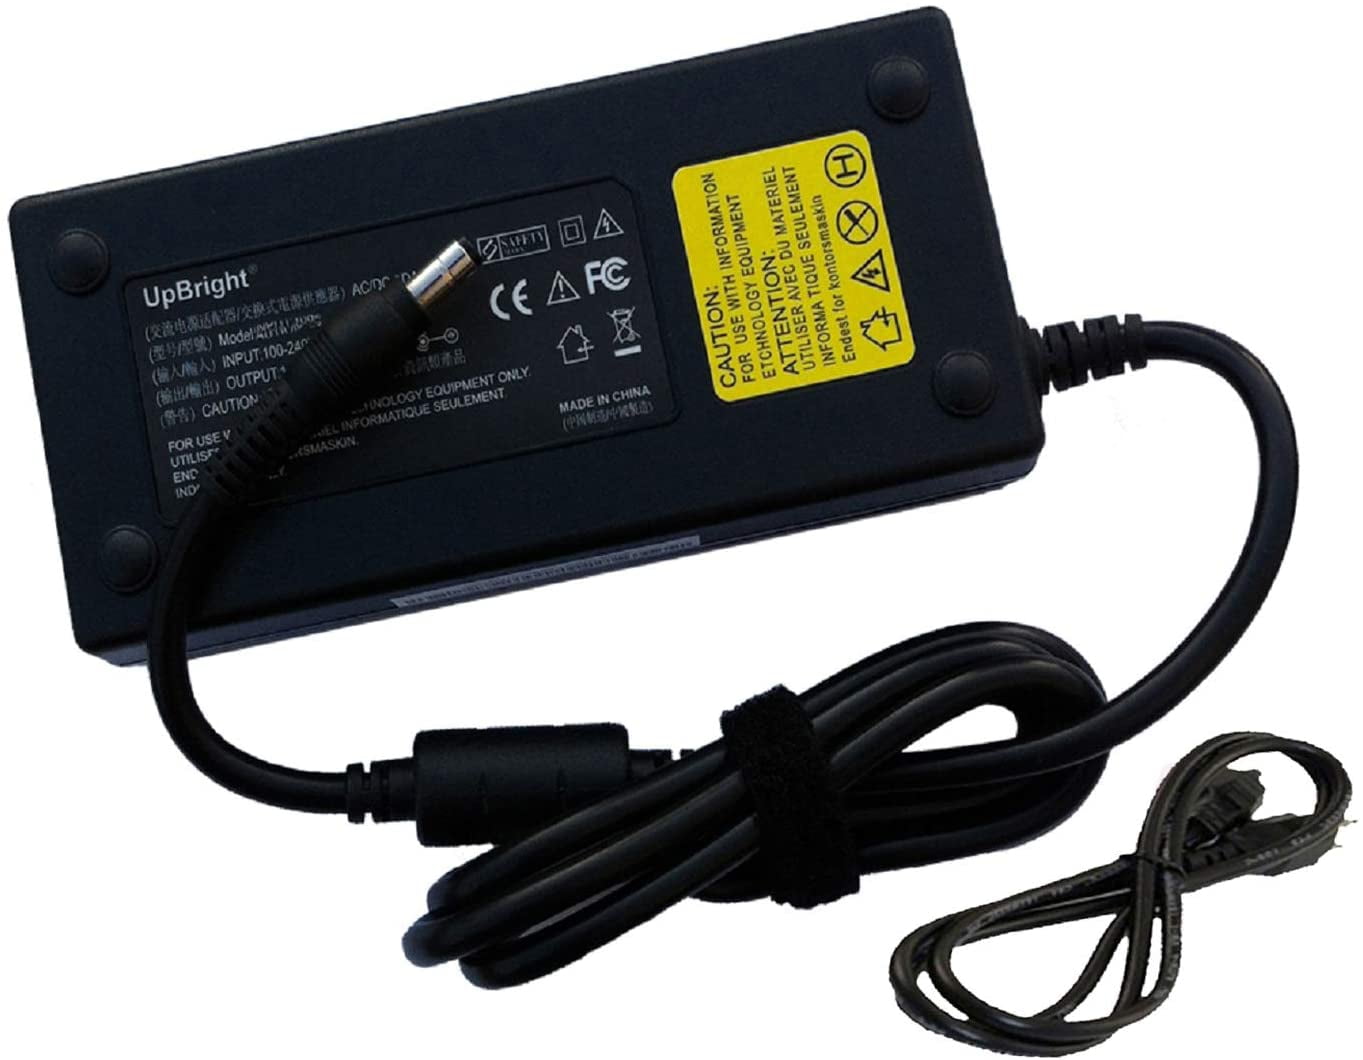 penny Eyesight truck UPBRIGHT NEW AC / DC Adapter For MSI GT70 DOMINATOR DRAGON-1886 ; GT70  DOMINATOR DRAGON-2202 Laptop Power Supply Cord Cable Battery Charger Mains  PSU - Walmart.com